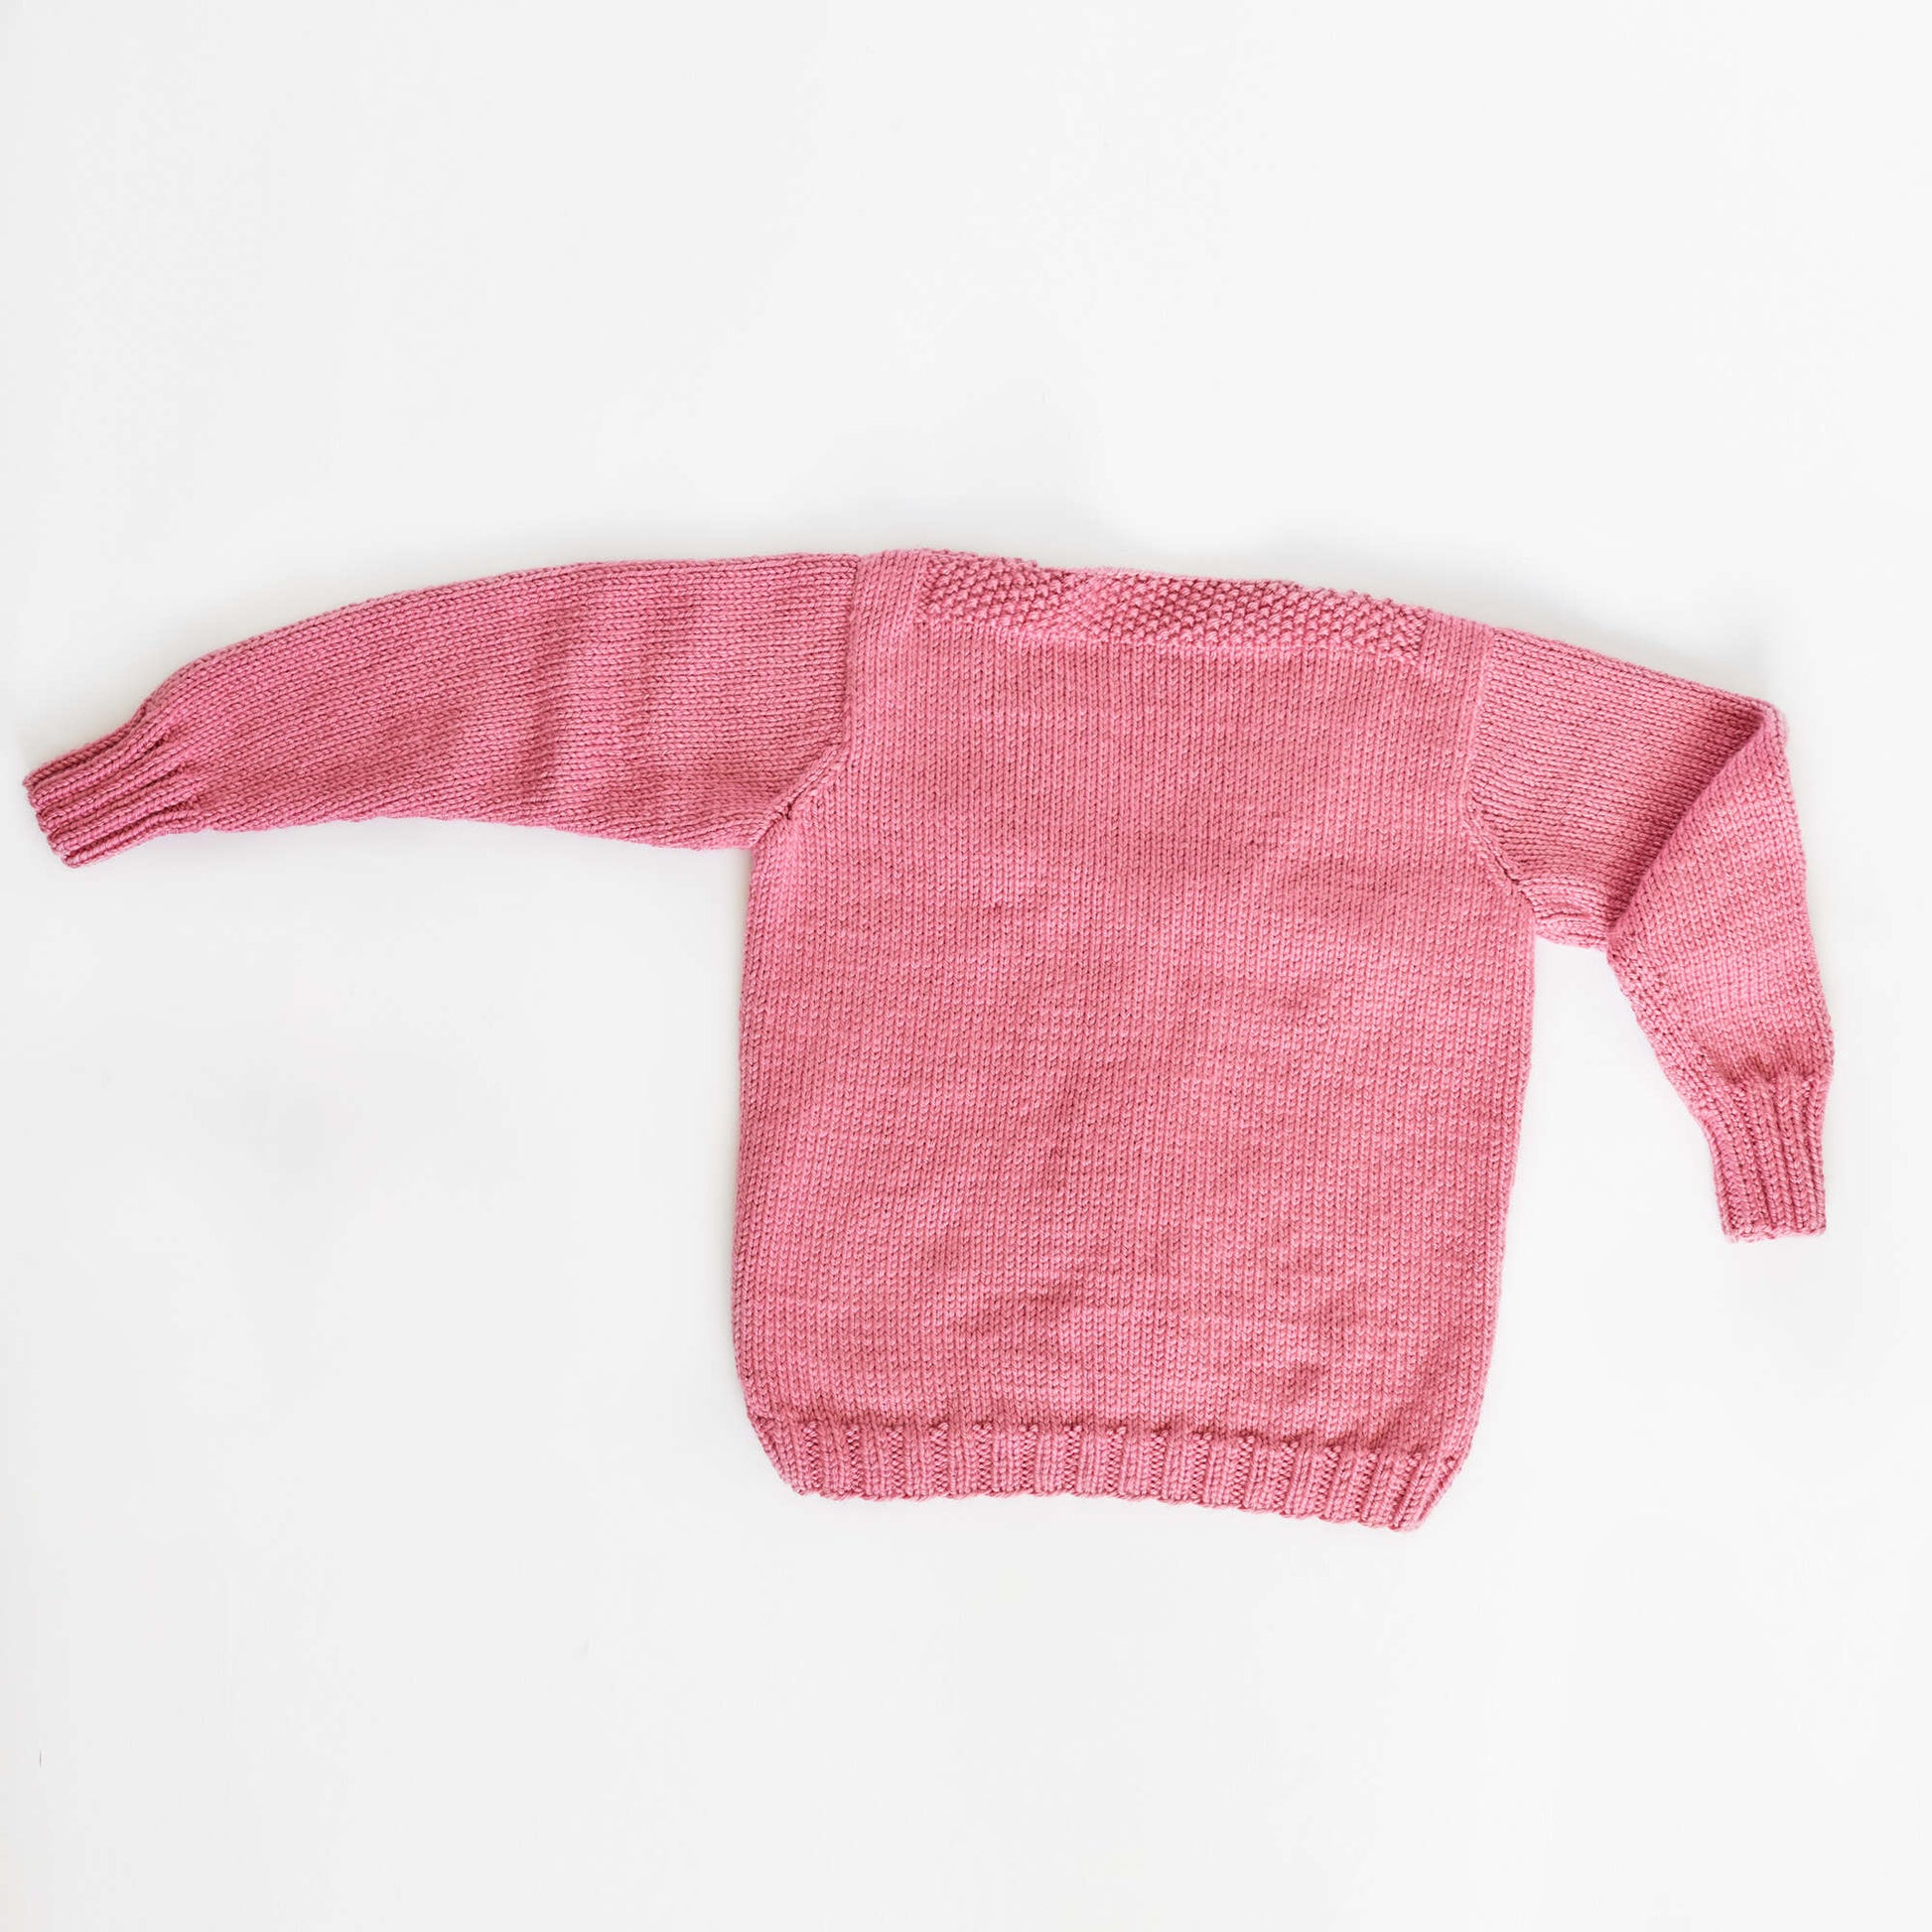 Free Red Heart Lovely Cable Knit Sweater Pattern